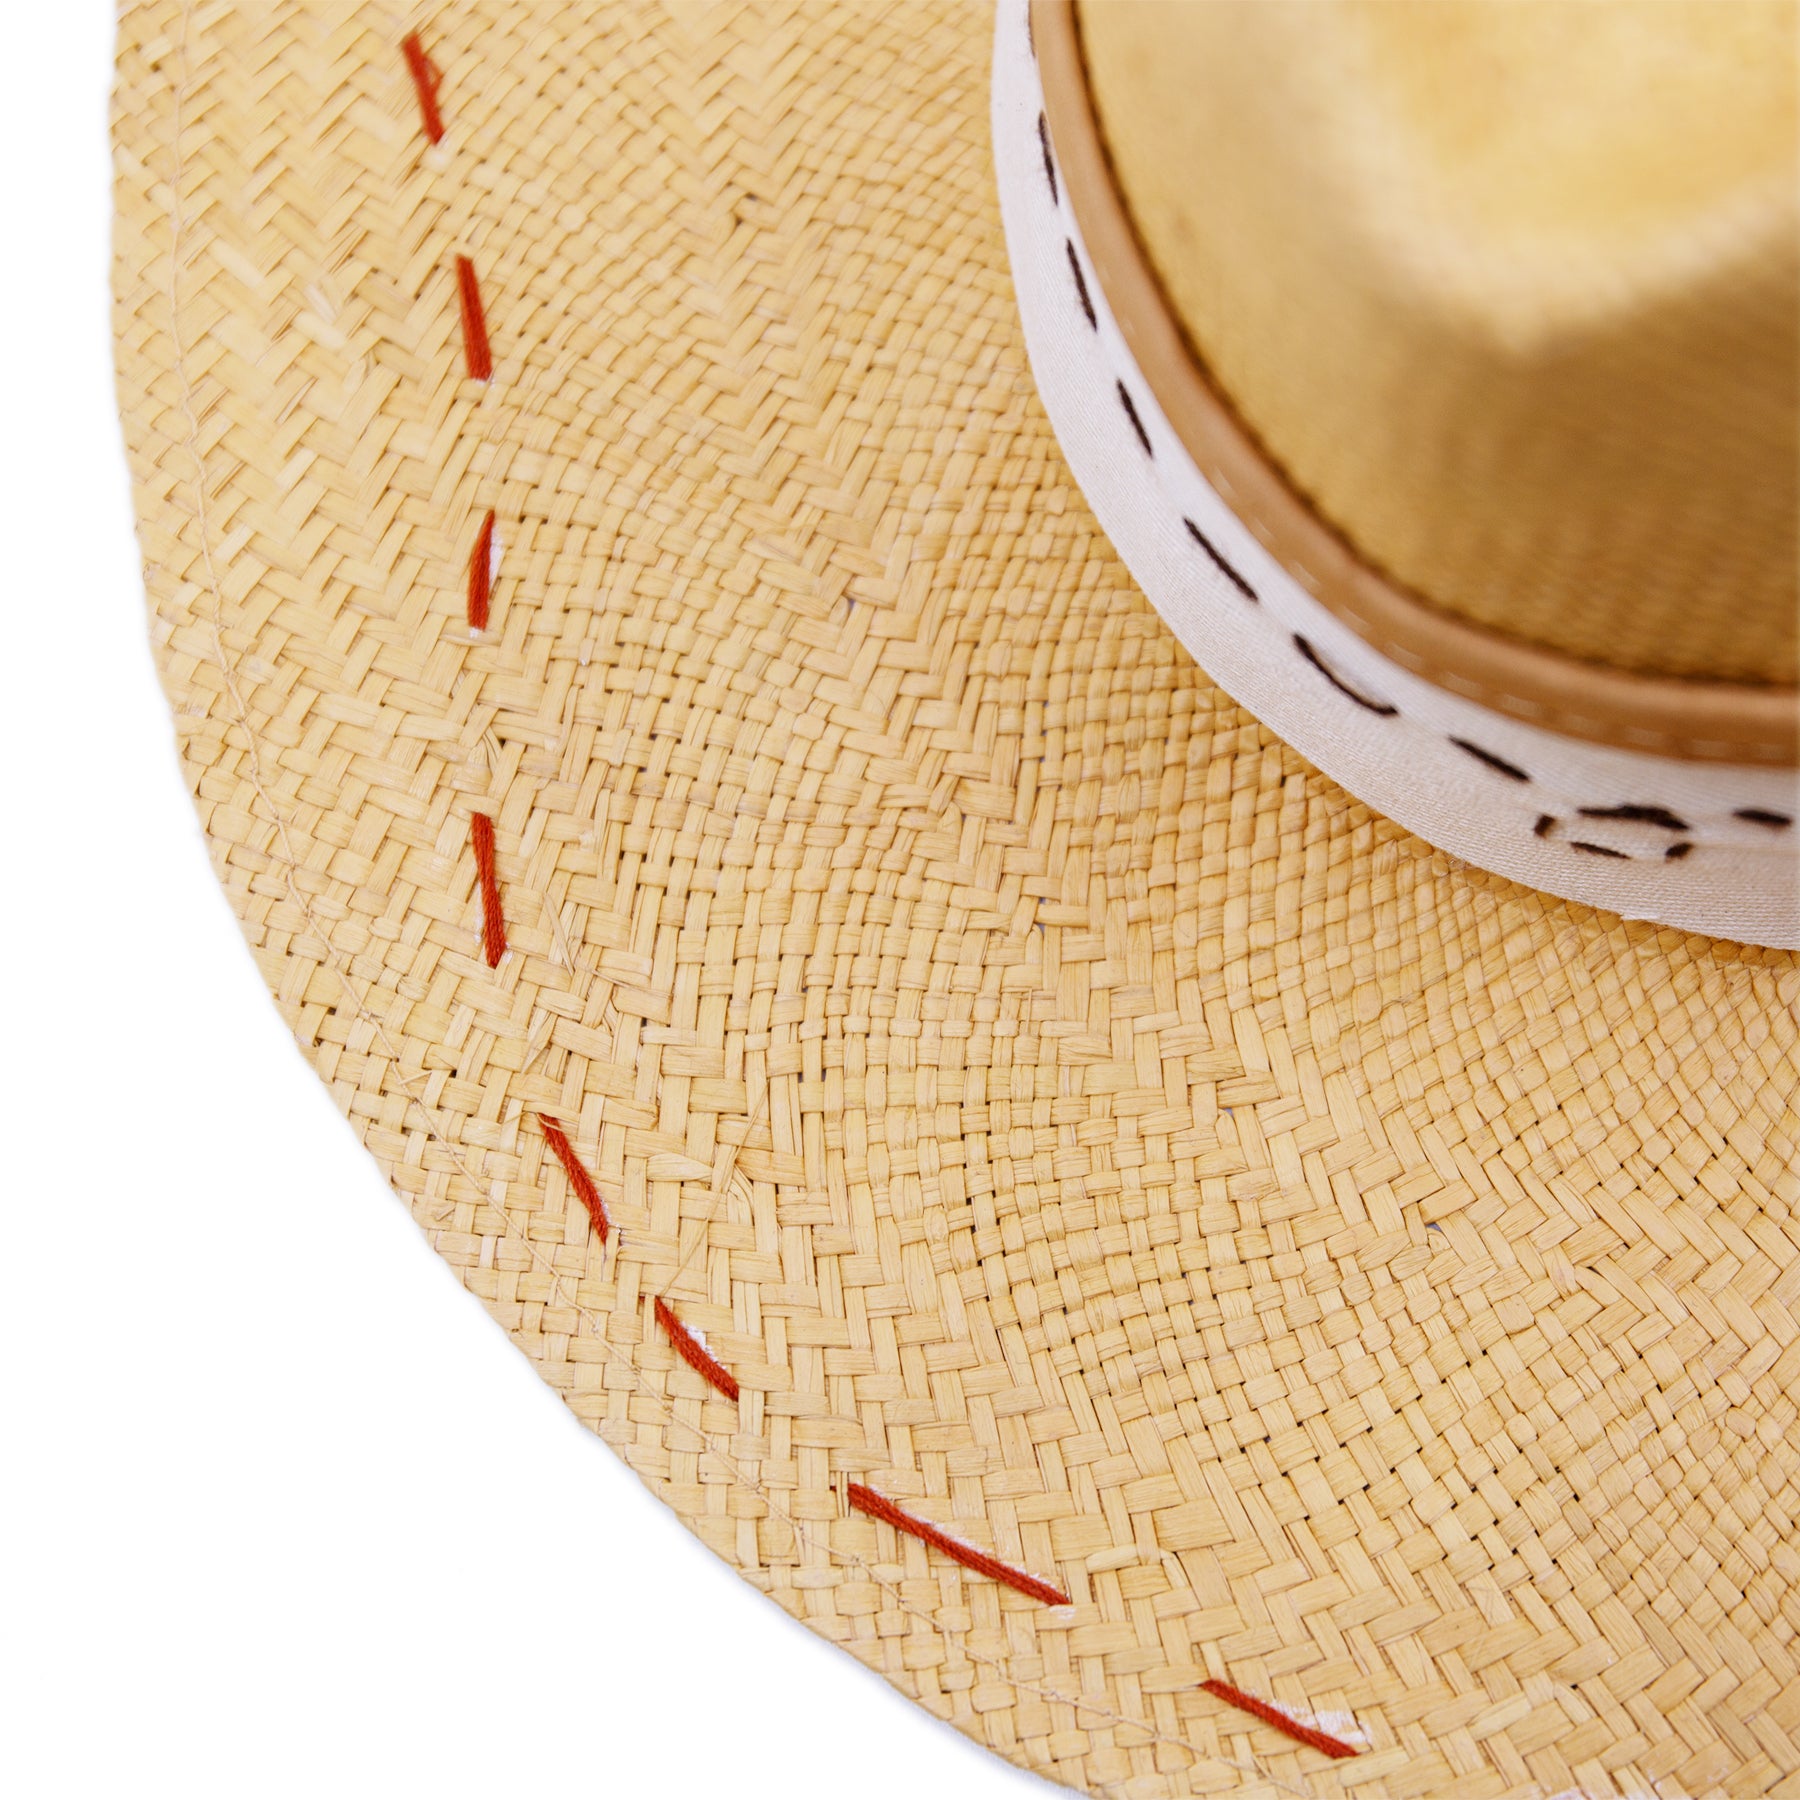 Round Up 100% Ecuadorian straw in Faded Mustard   2” grosgrain with cowpoke embroidery band  Leather binding on band   NF lasso embroidery around the brim  Woven in Ecuador  Flat brim   Made in USA